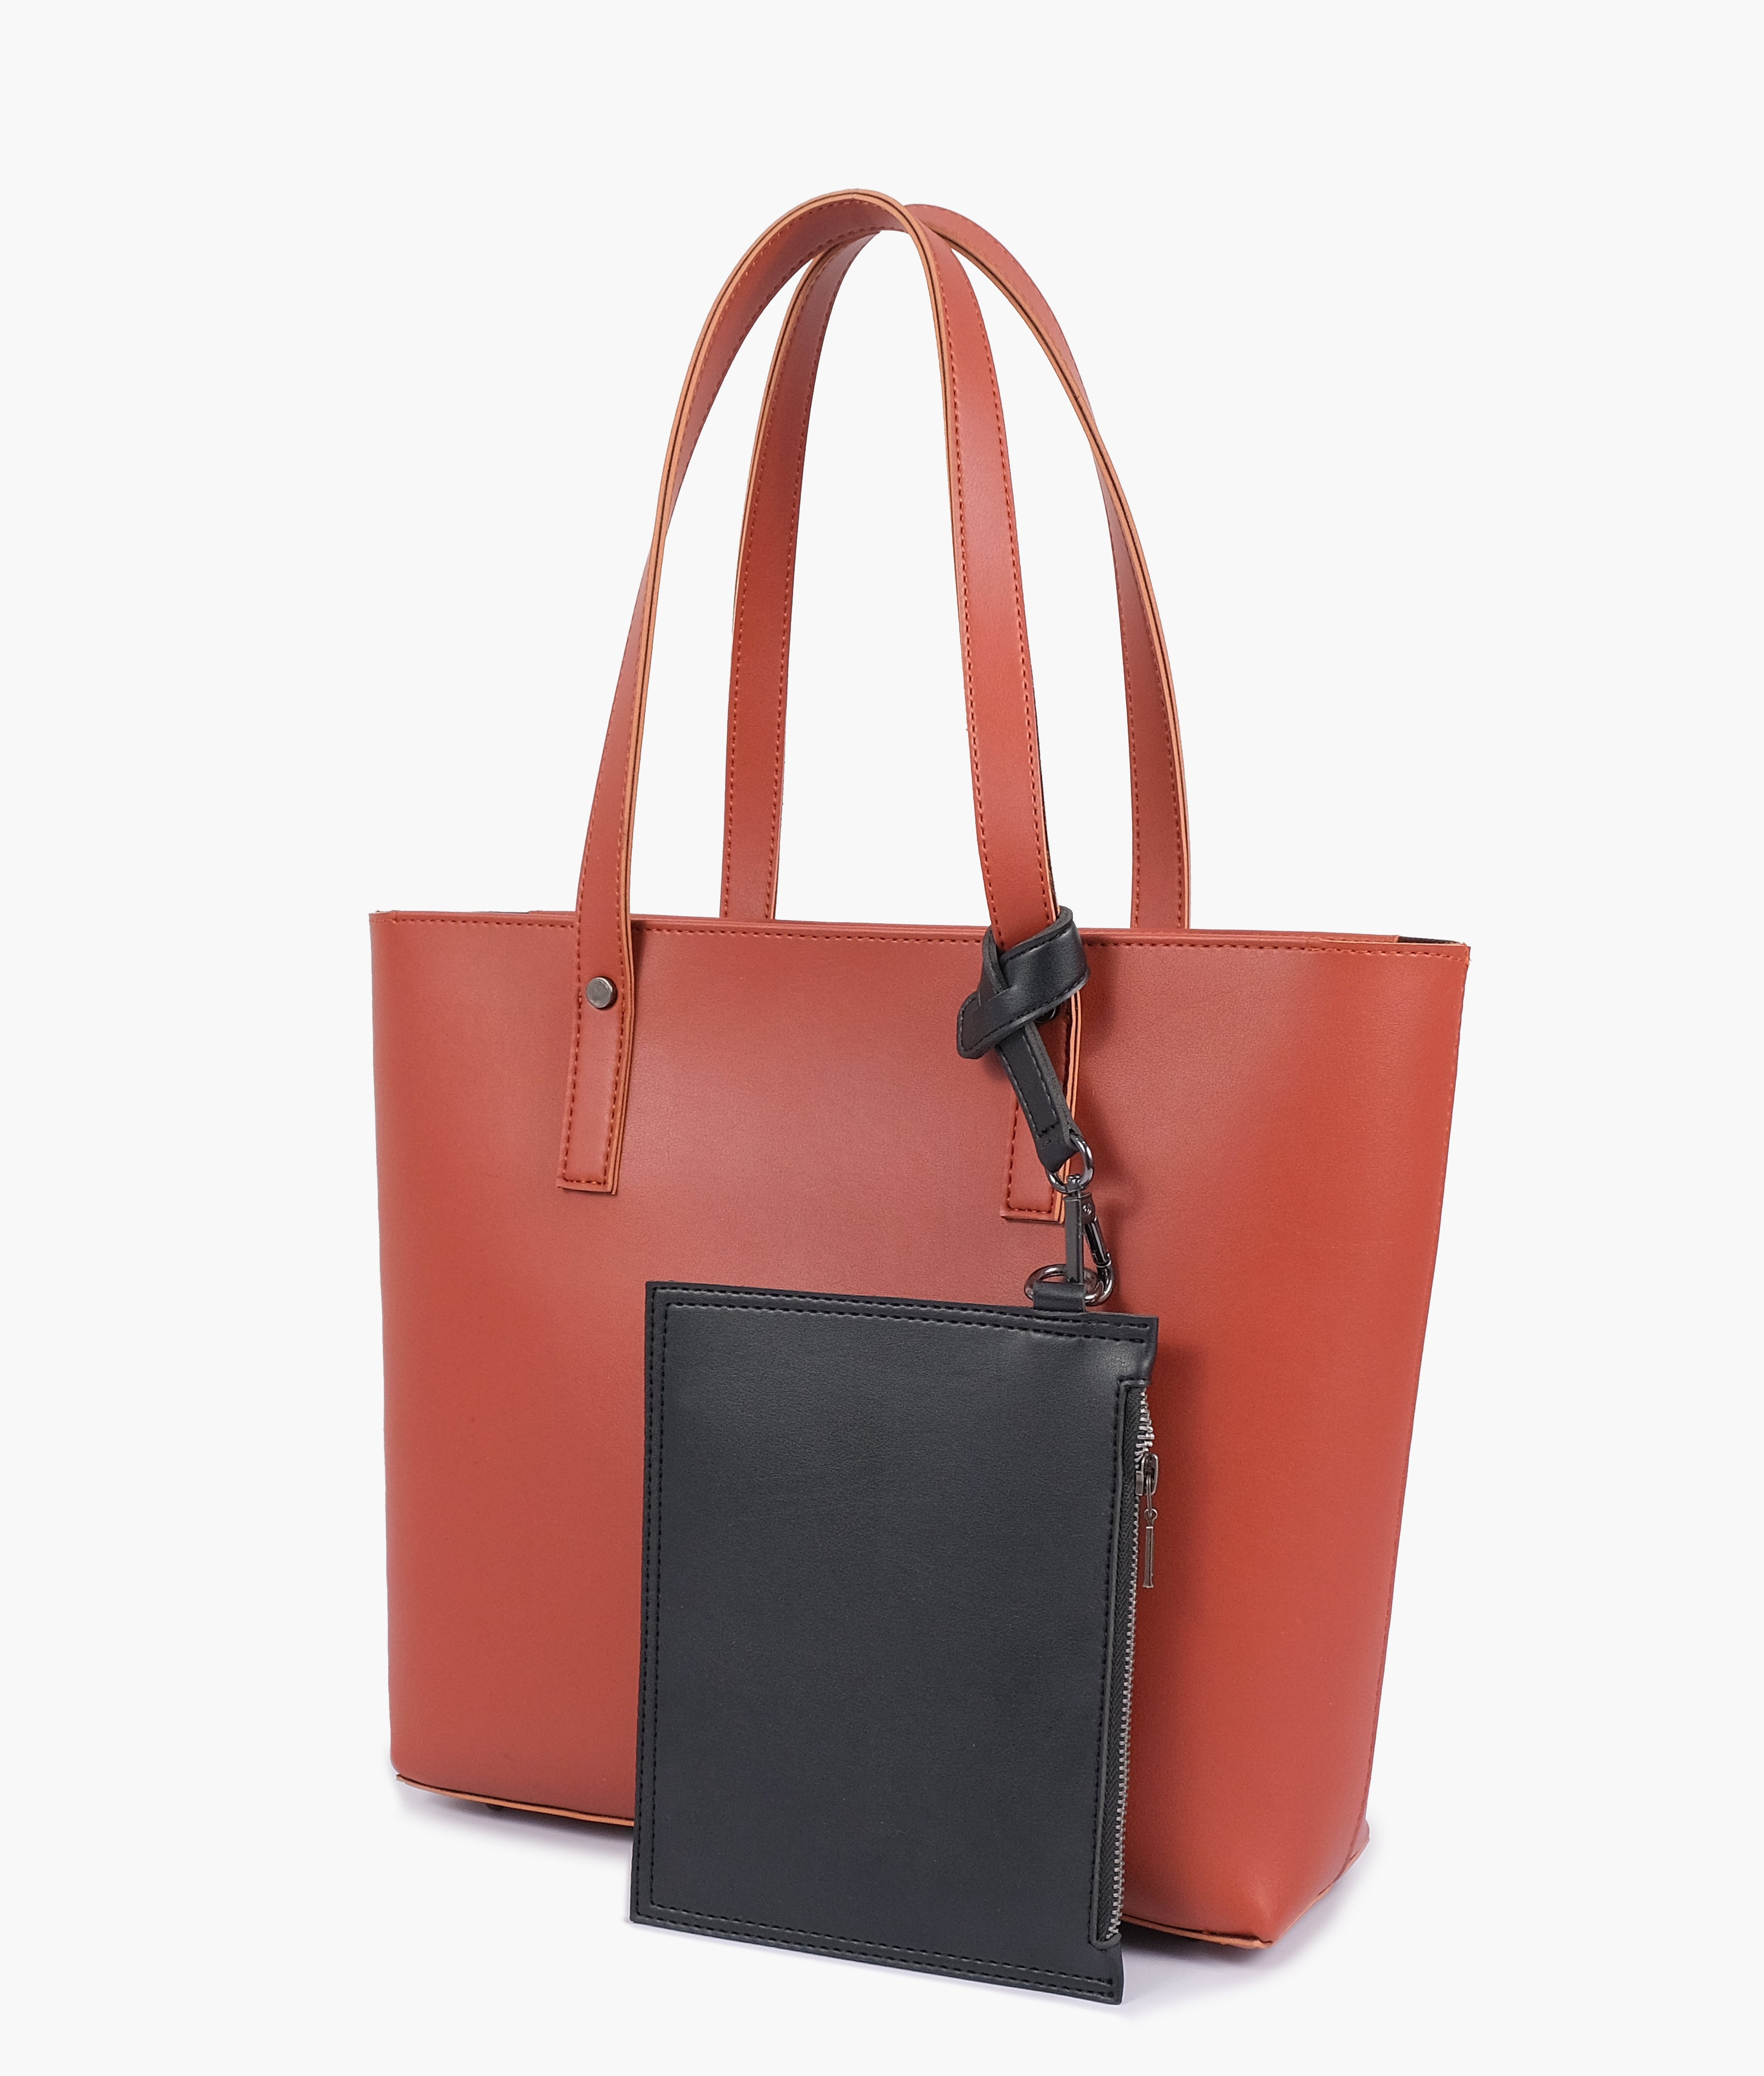 Rust tote bag with detachable pouch